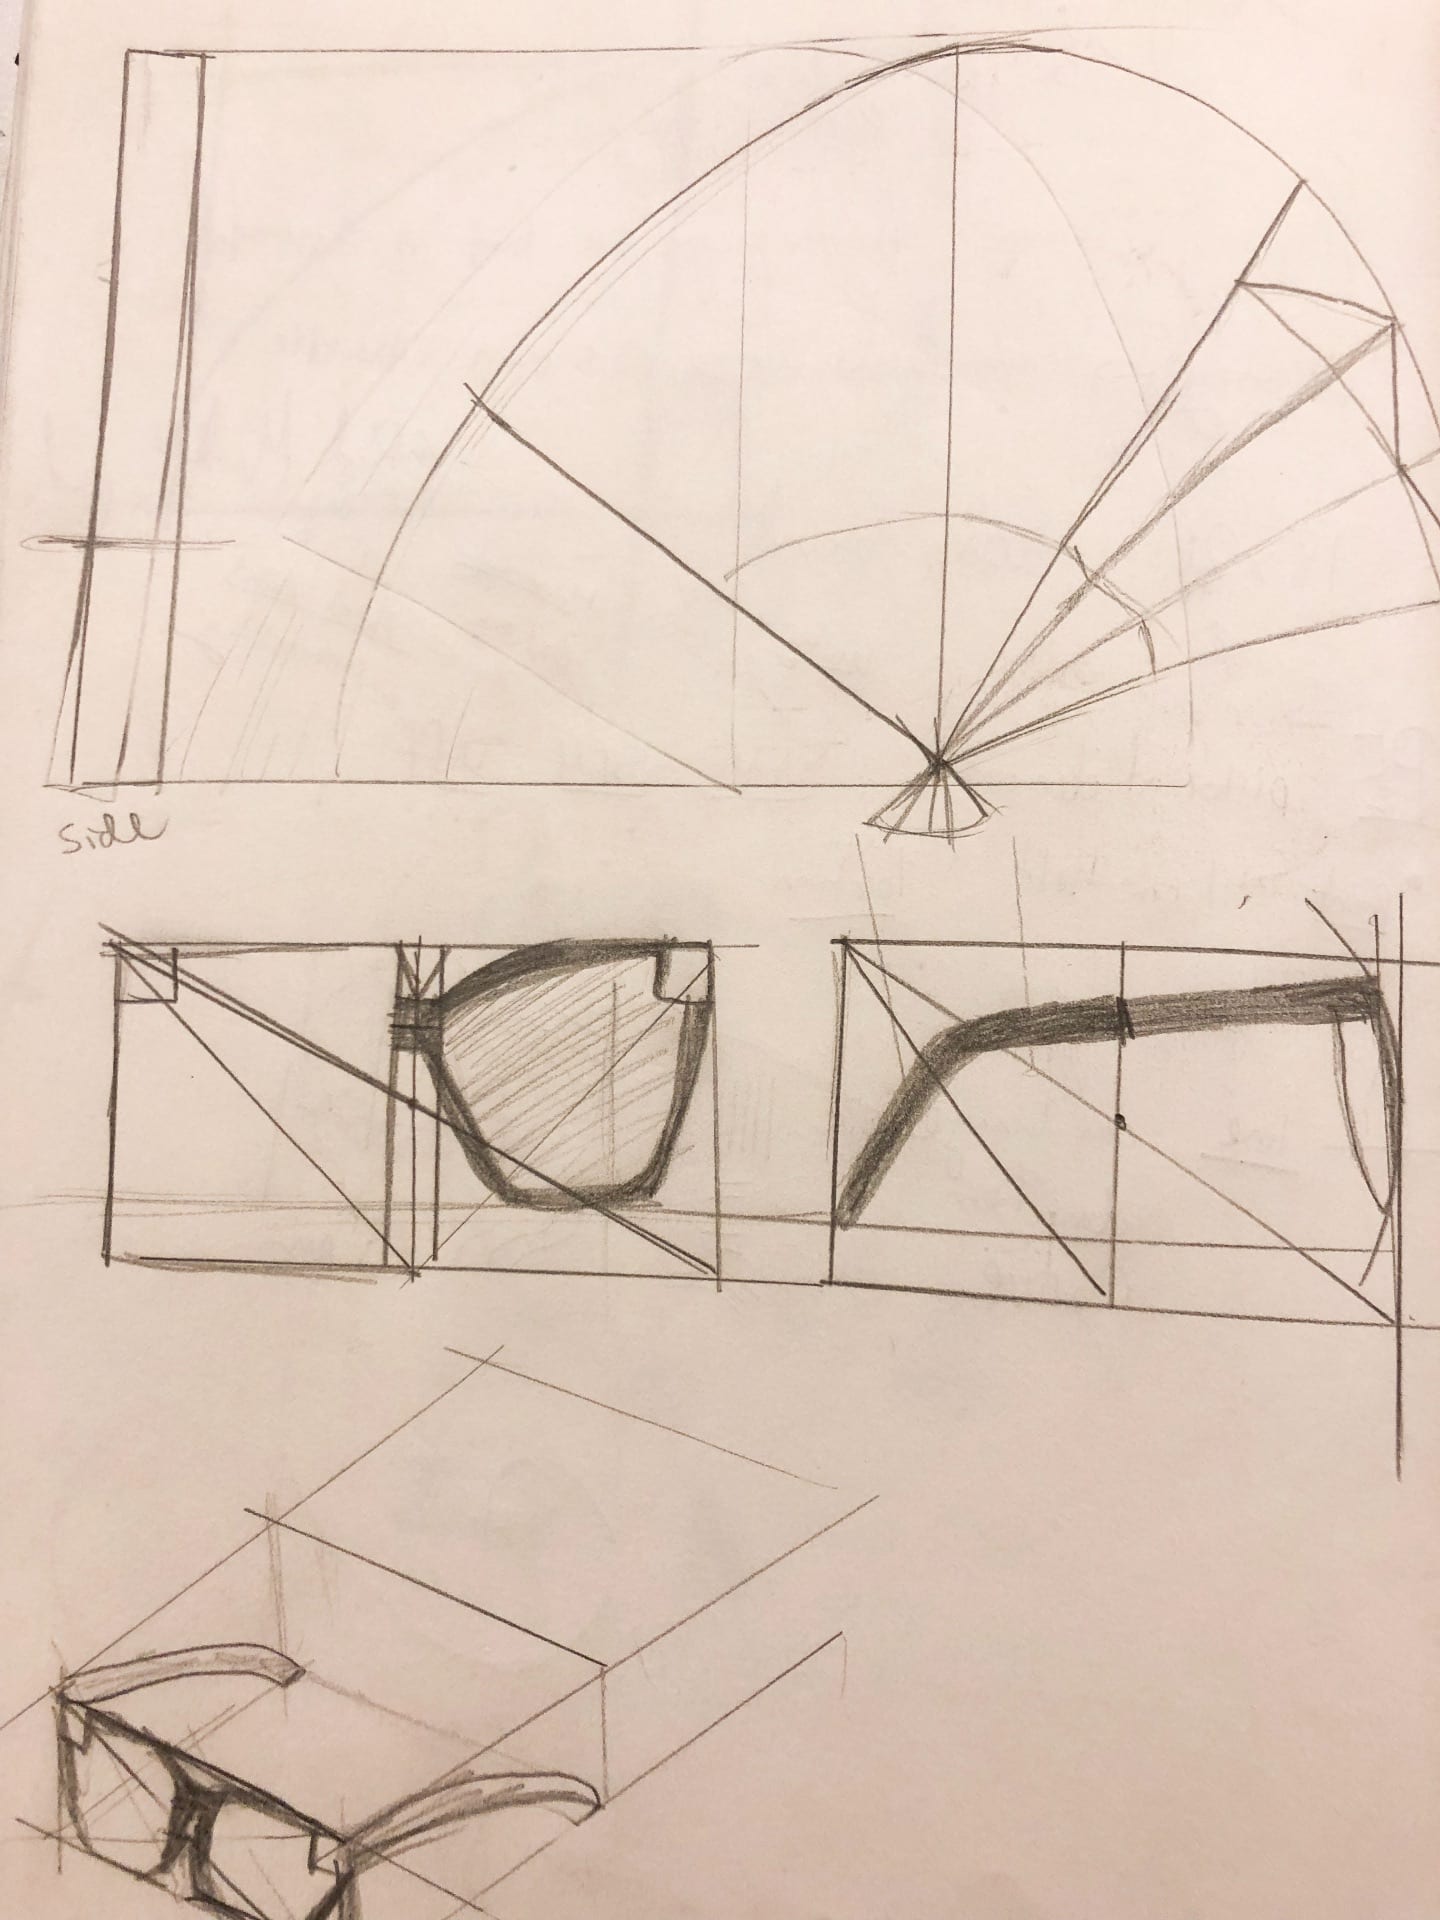 Golden Rectangle and Accessory Drawings- practice